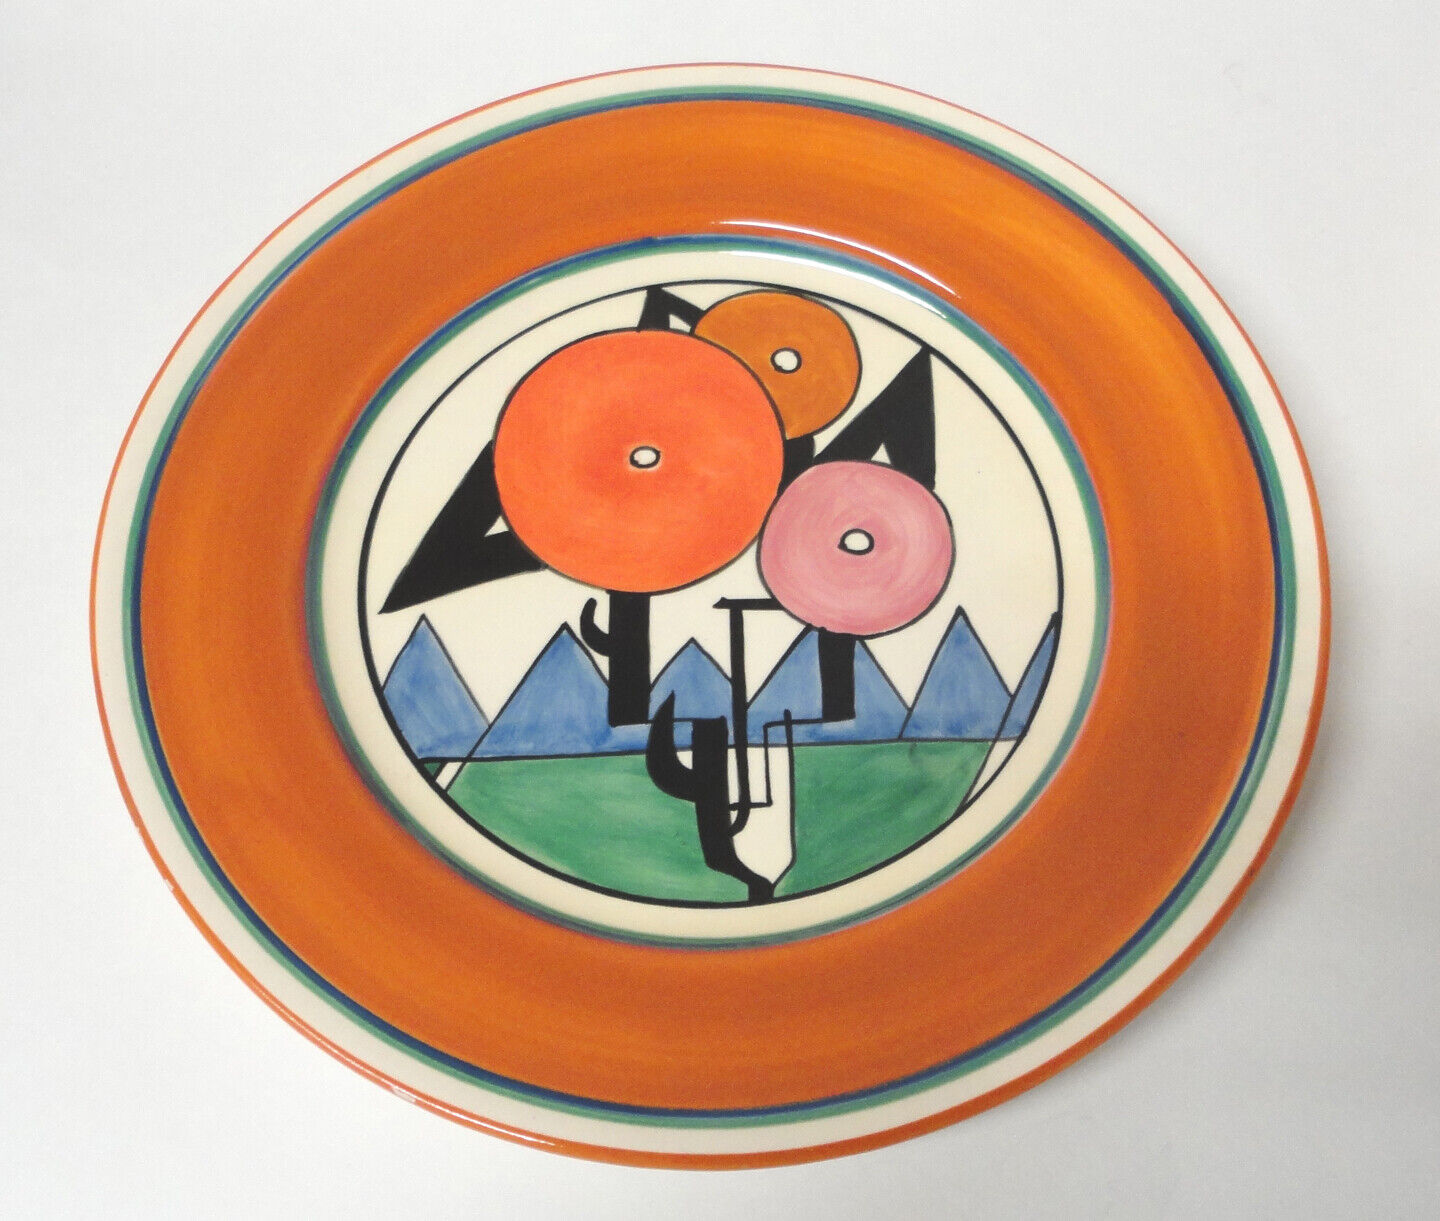 1-Art Deco CLARICE CLIFF MMA '93 【SALE／58%OFF】 BIZARRE Hand 超美品の DINNER Autumn Painted PLATE 10